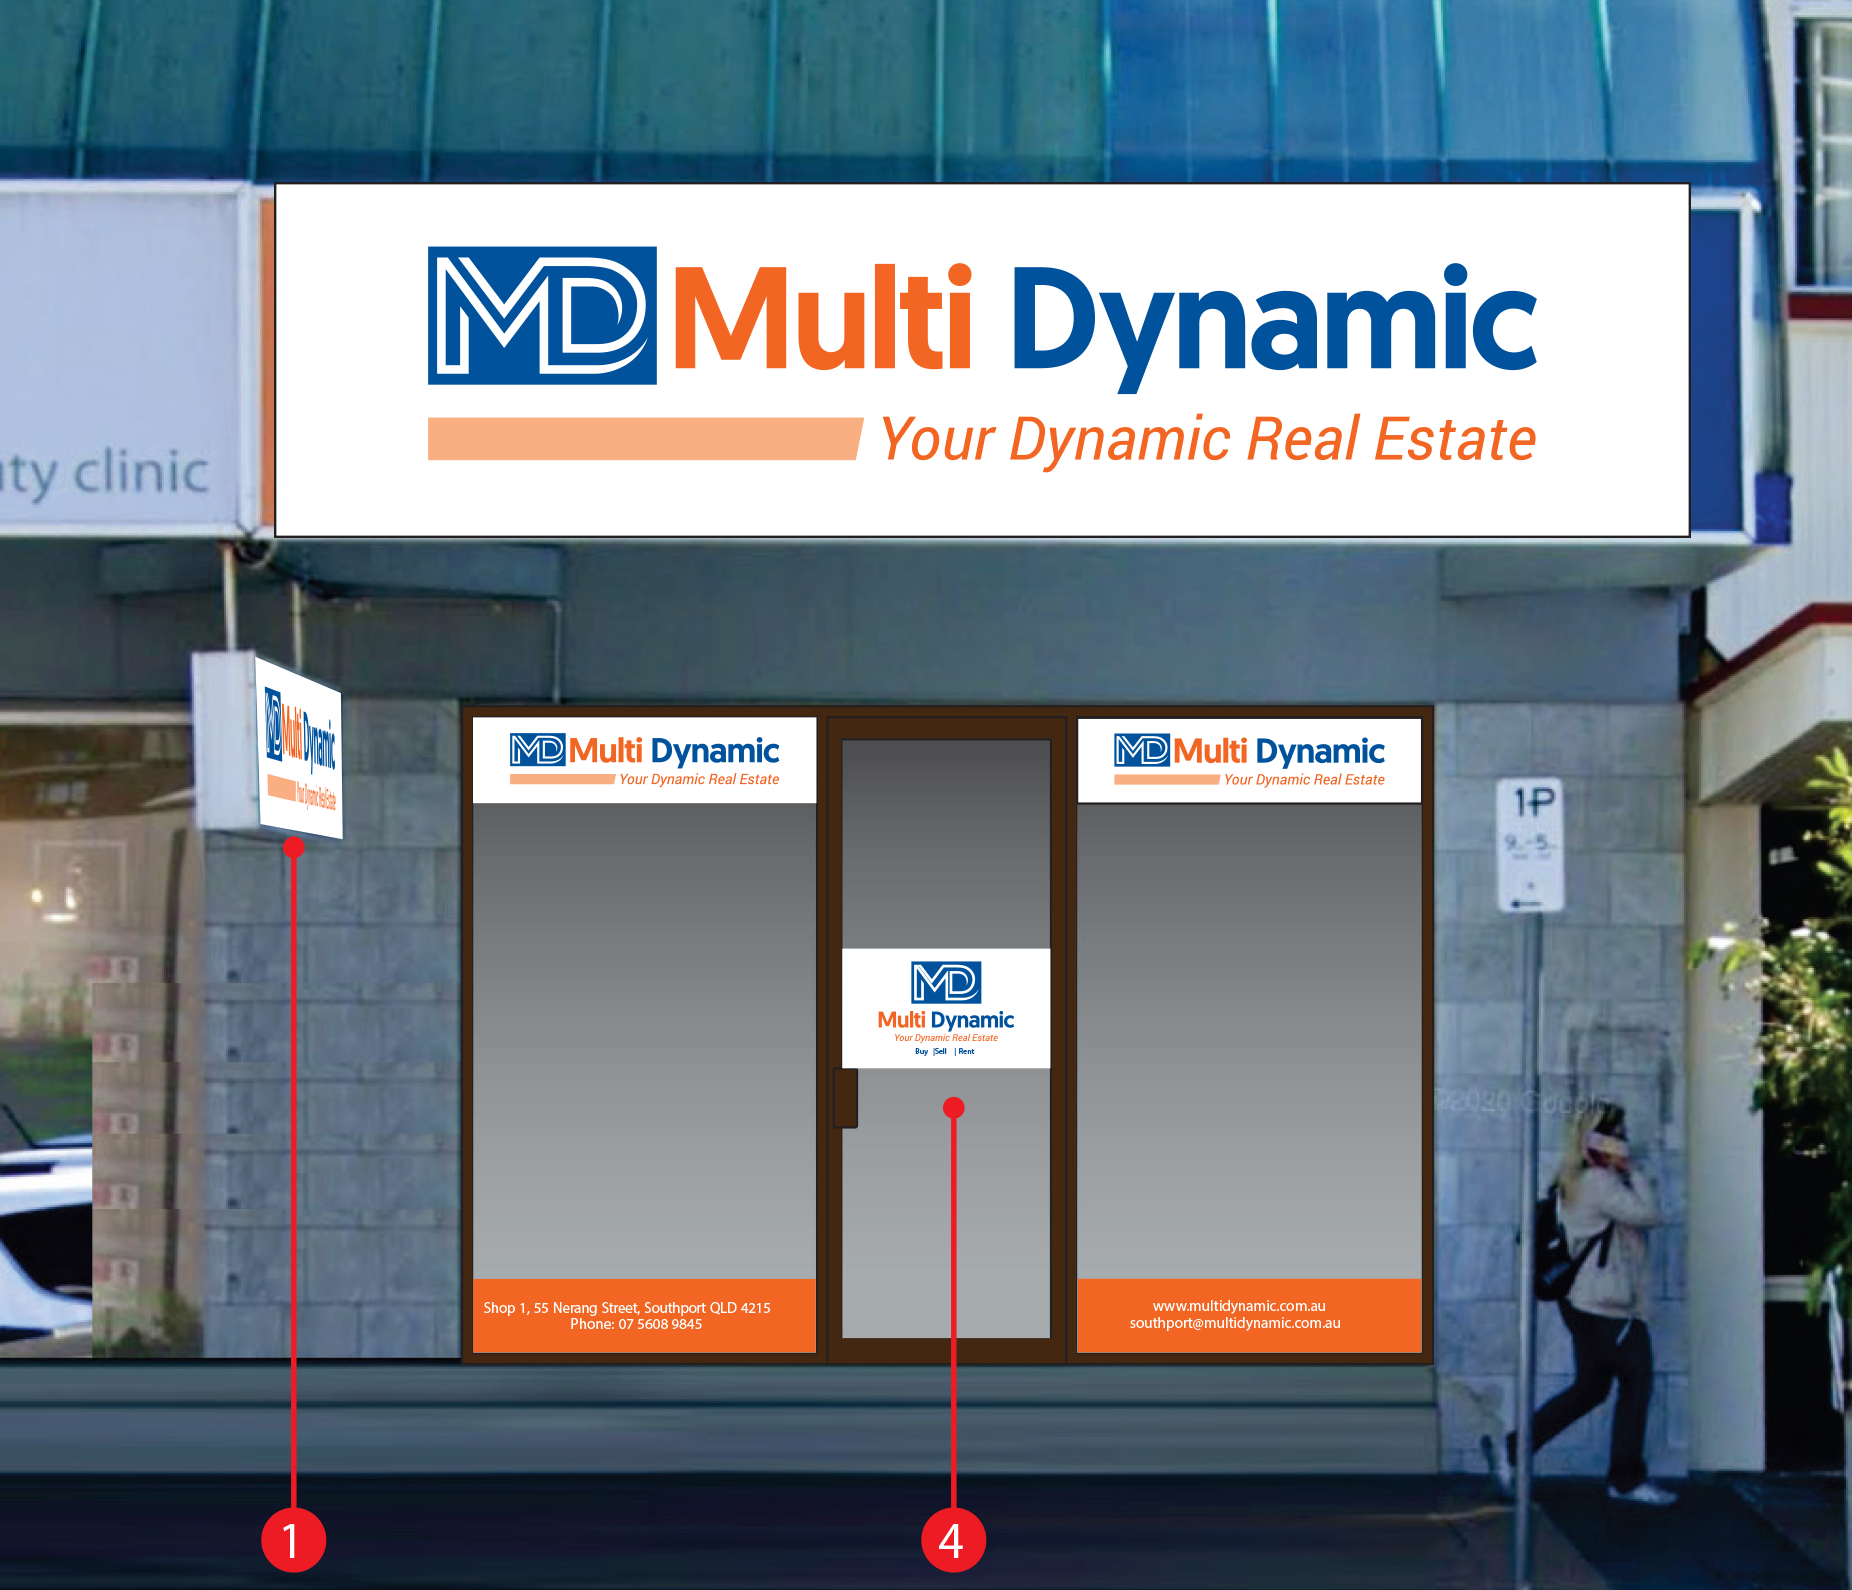 <p style="text-align: center;"><strong>MULTI DYNAMICS SOUTHPORT</strong> | Creative Support, Brand Positioning, Print & Signage</p>
